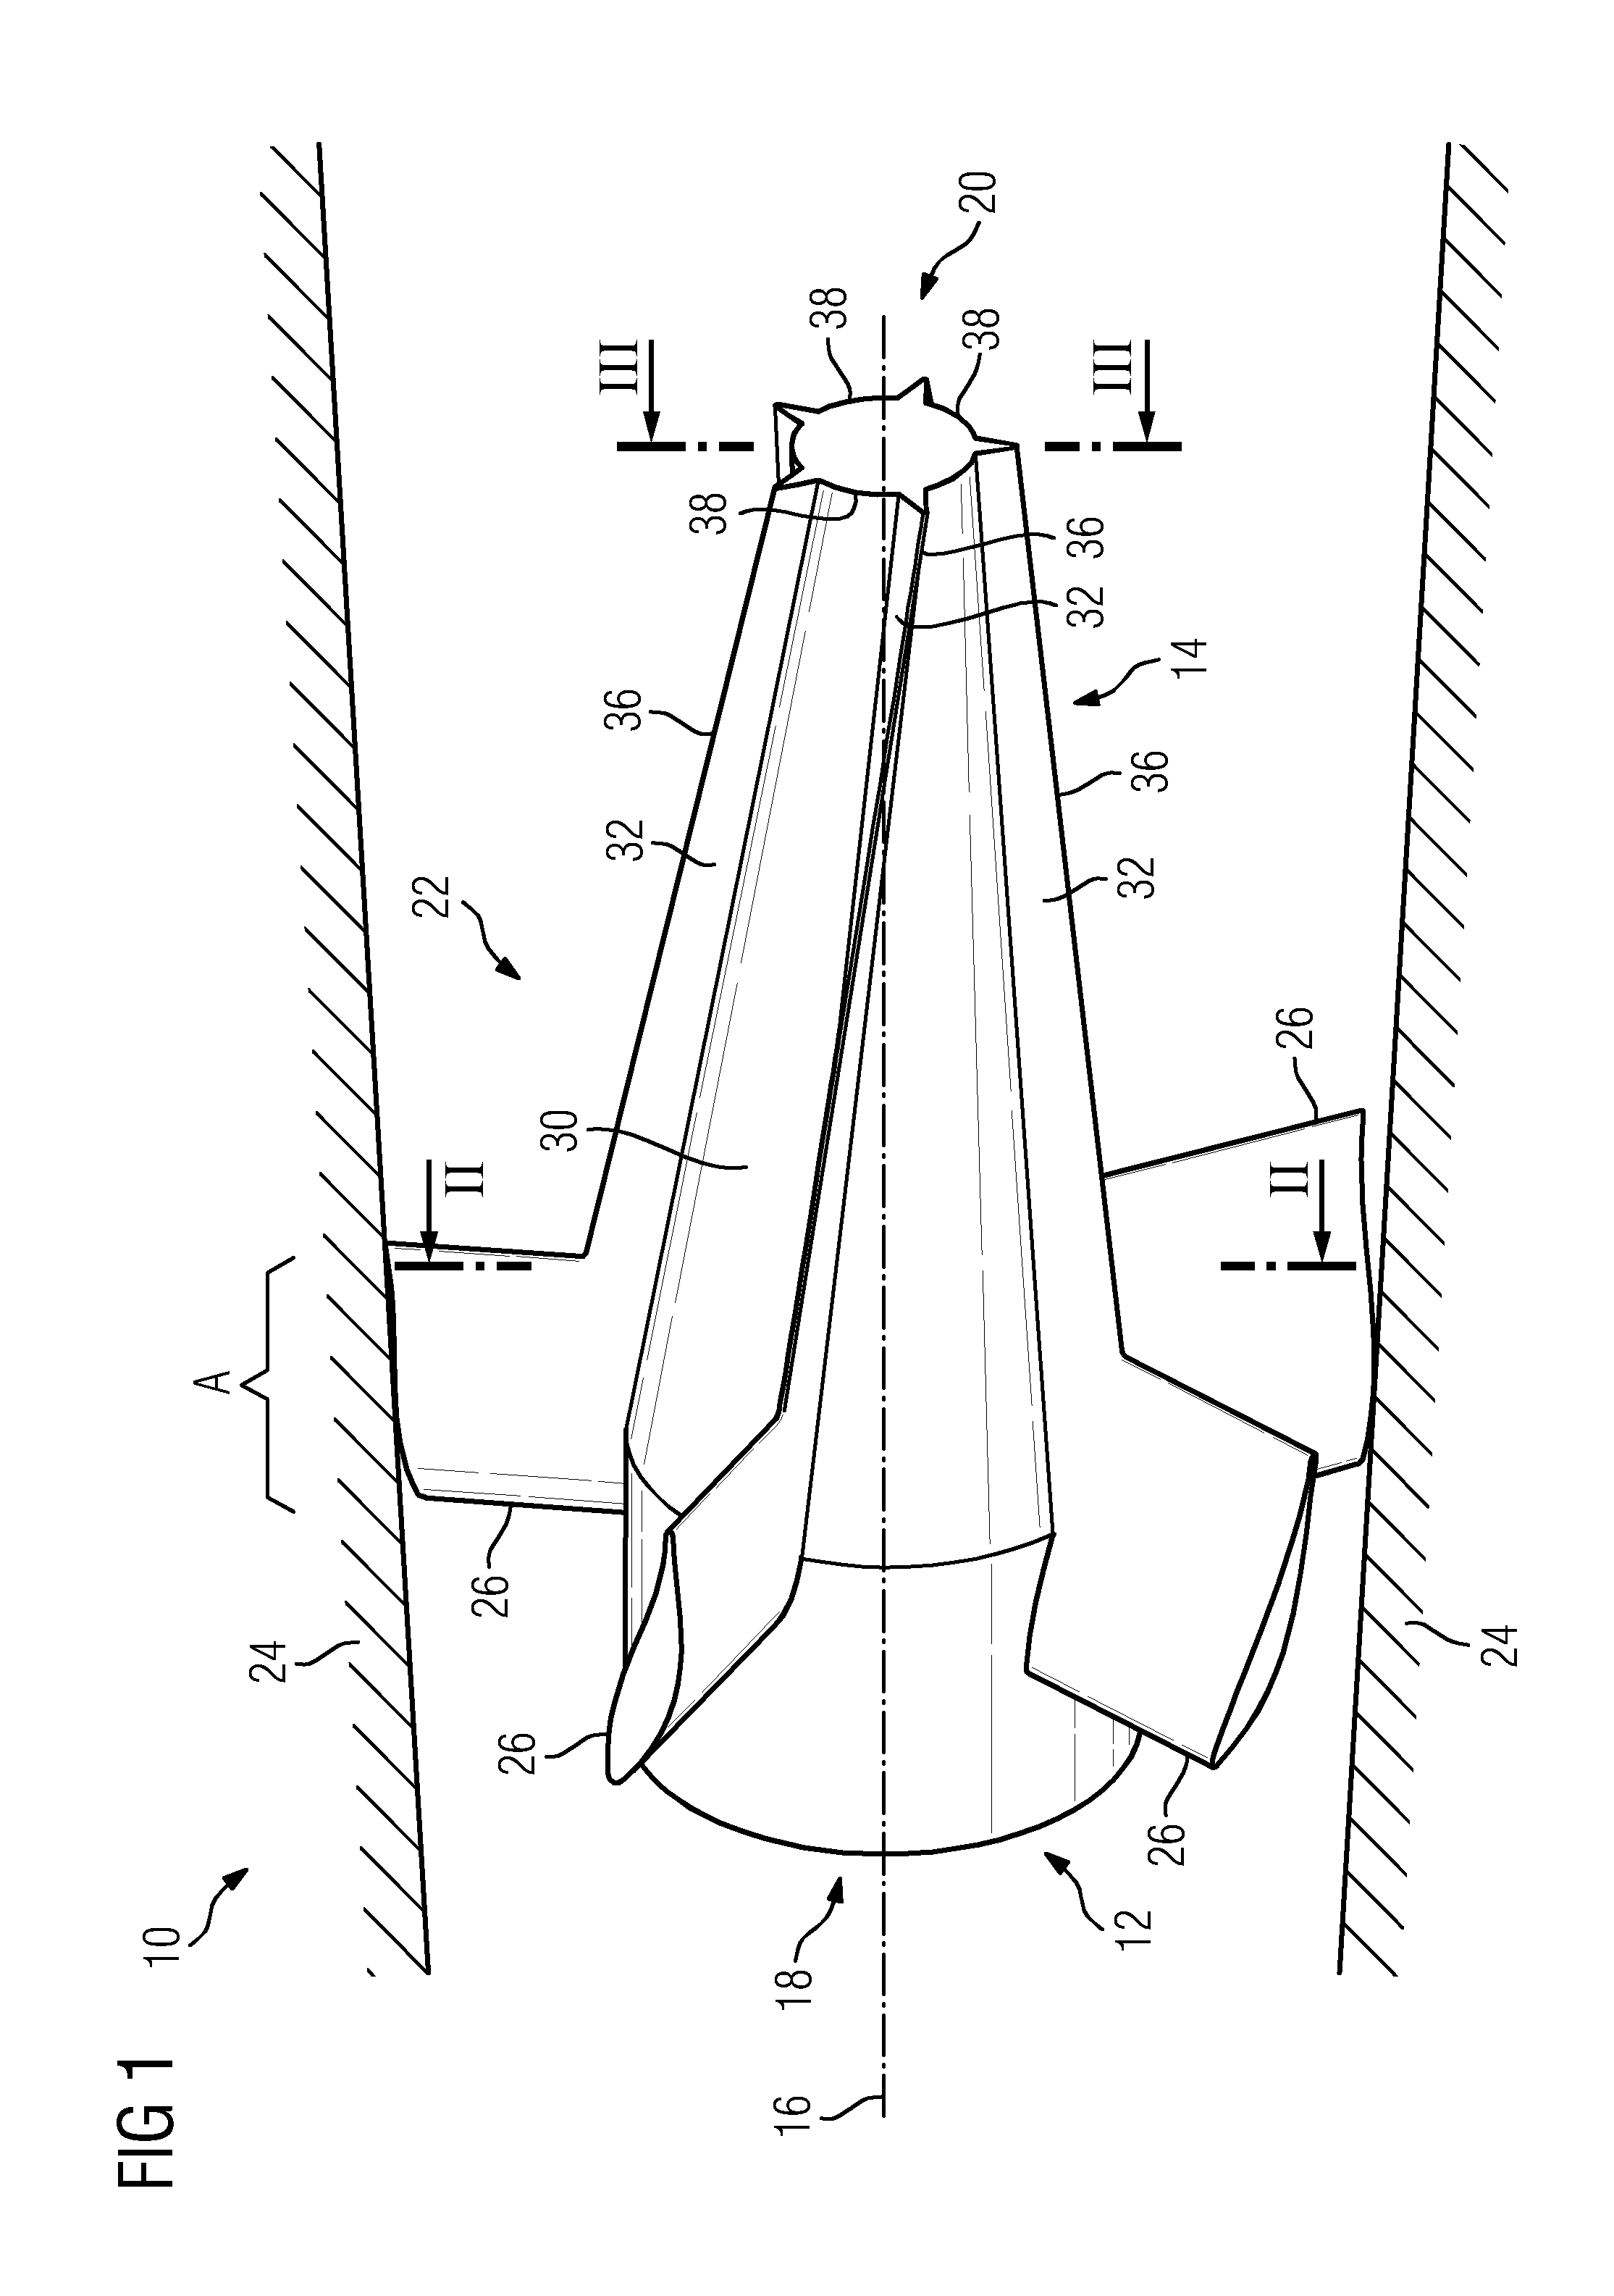 Exhaust gas diffuser of a gas turbine